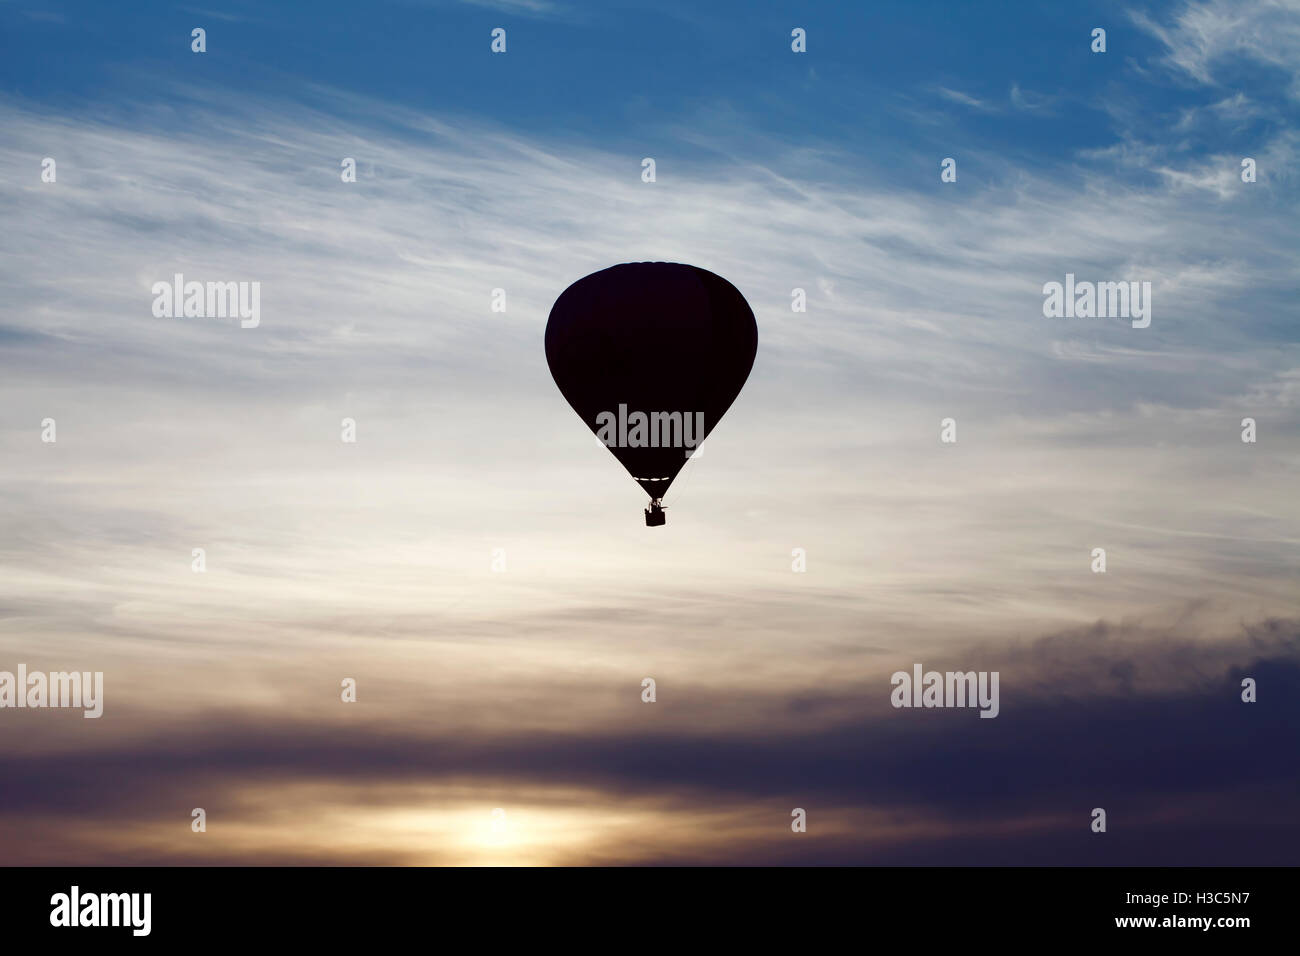 Balloon on a background of the beautiful sky and sunset, lifestyle, freedom and inspiration Stock Photo